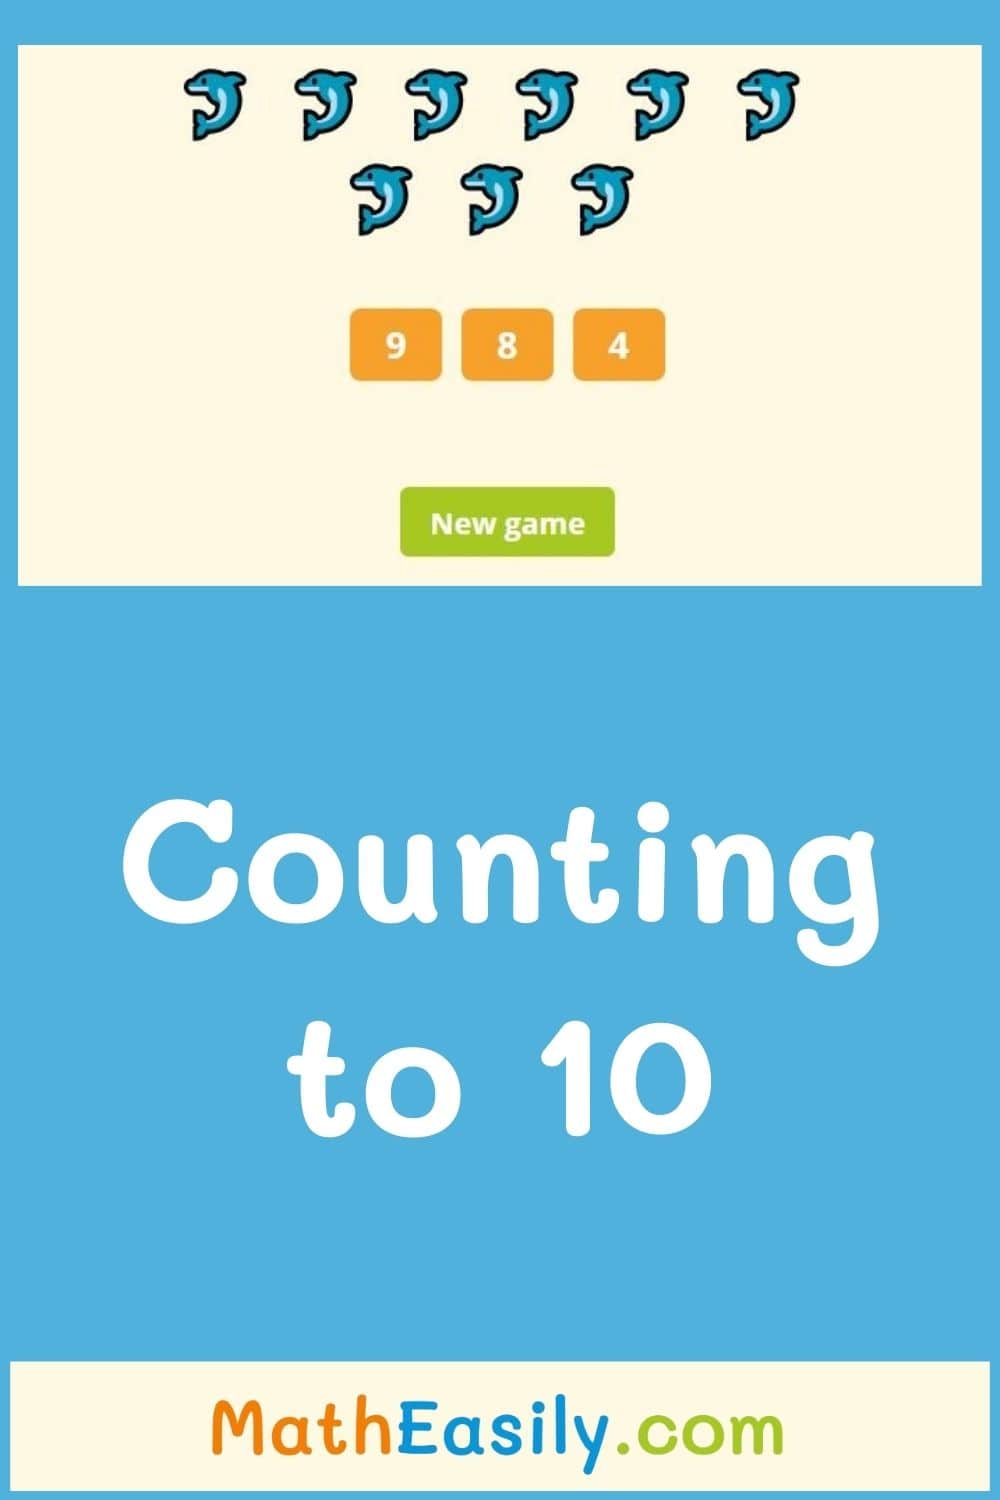 Free online counting games for Kindergarten 1-20. counting pictures for kindergarten. interactive kindergarten counting games online. 
free counting games for kindergarten online. interactive counting games for kindergarten. counting objects within 20 games for kindergarteners.